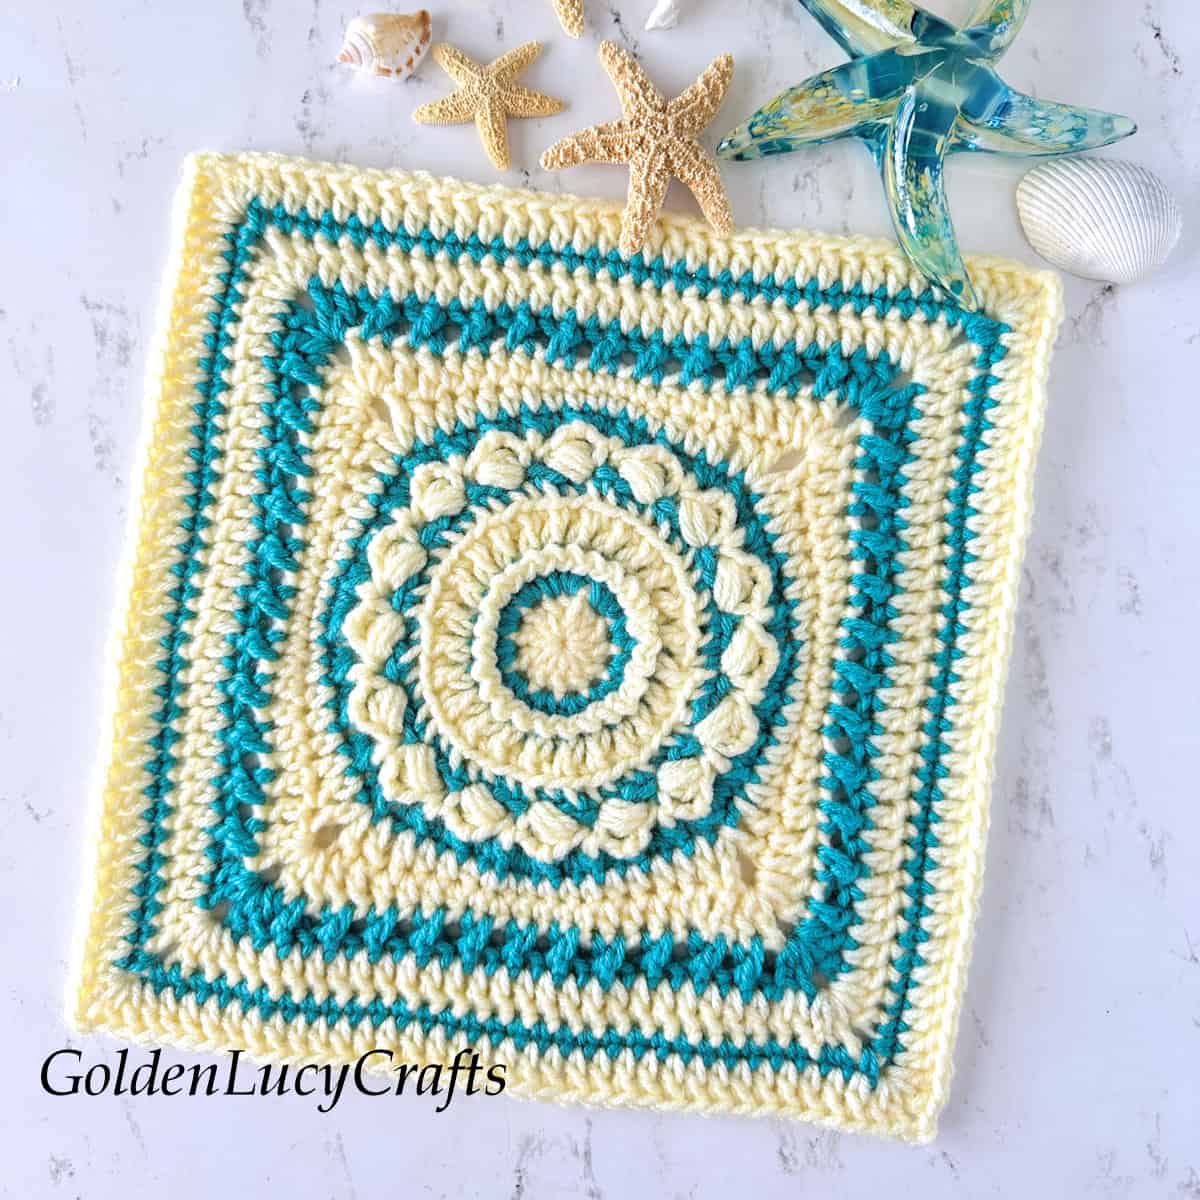 Crochet square block in cream and aqua colors, star fish and sea shell in the background.